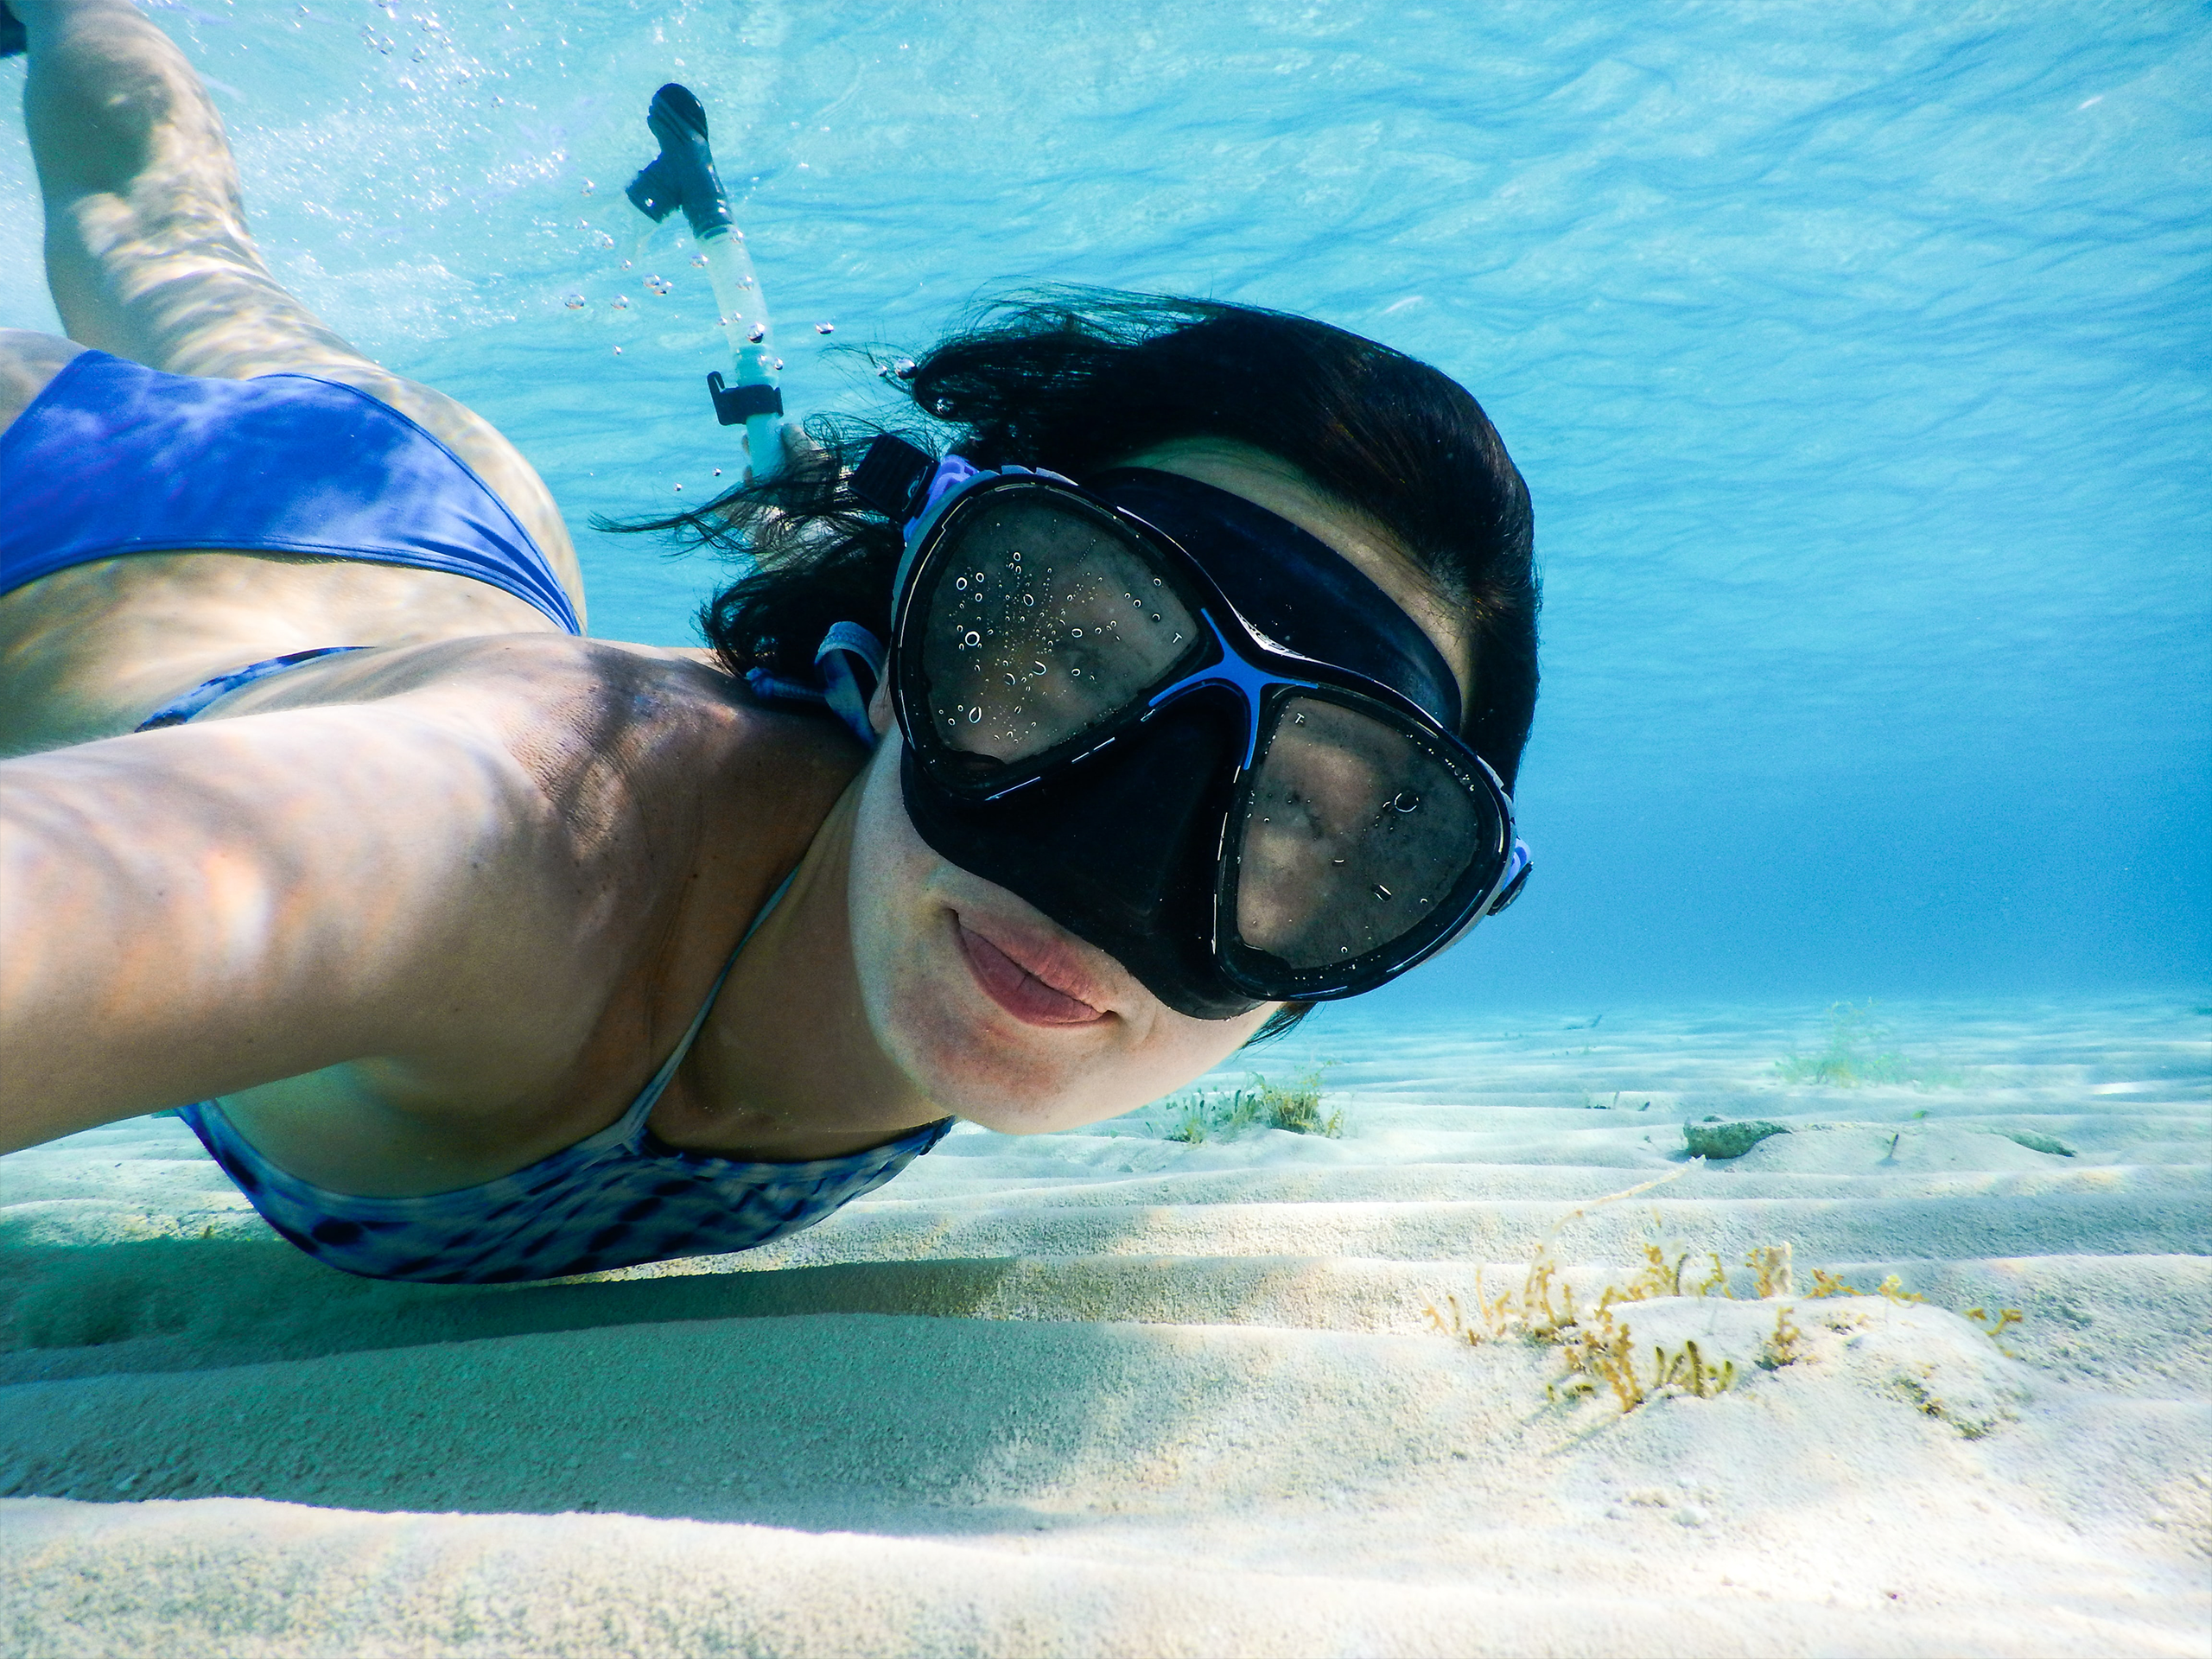 Woman snorkeling in the waters of the Caribbean Sea off Isla Mujeres